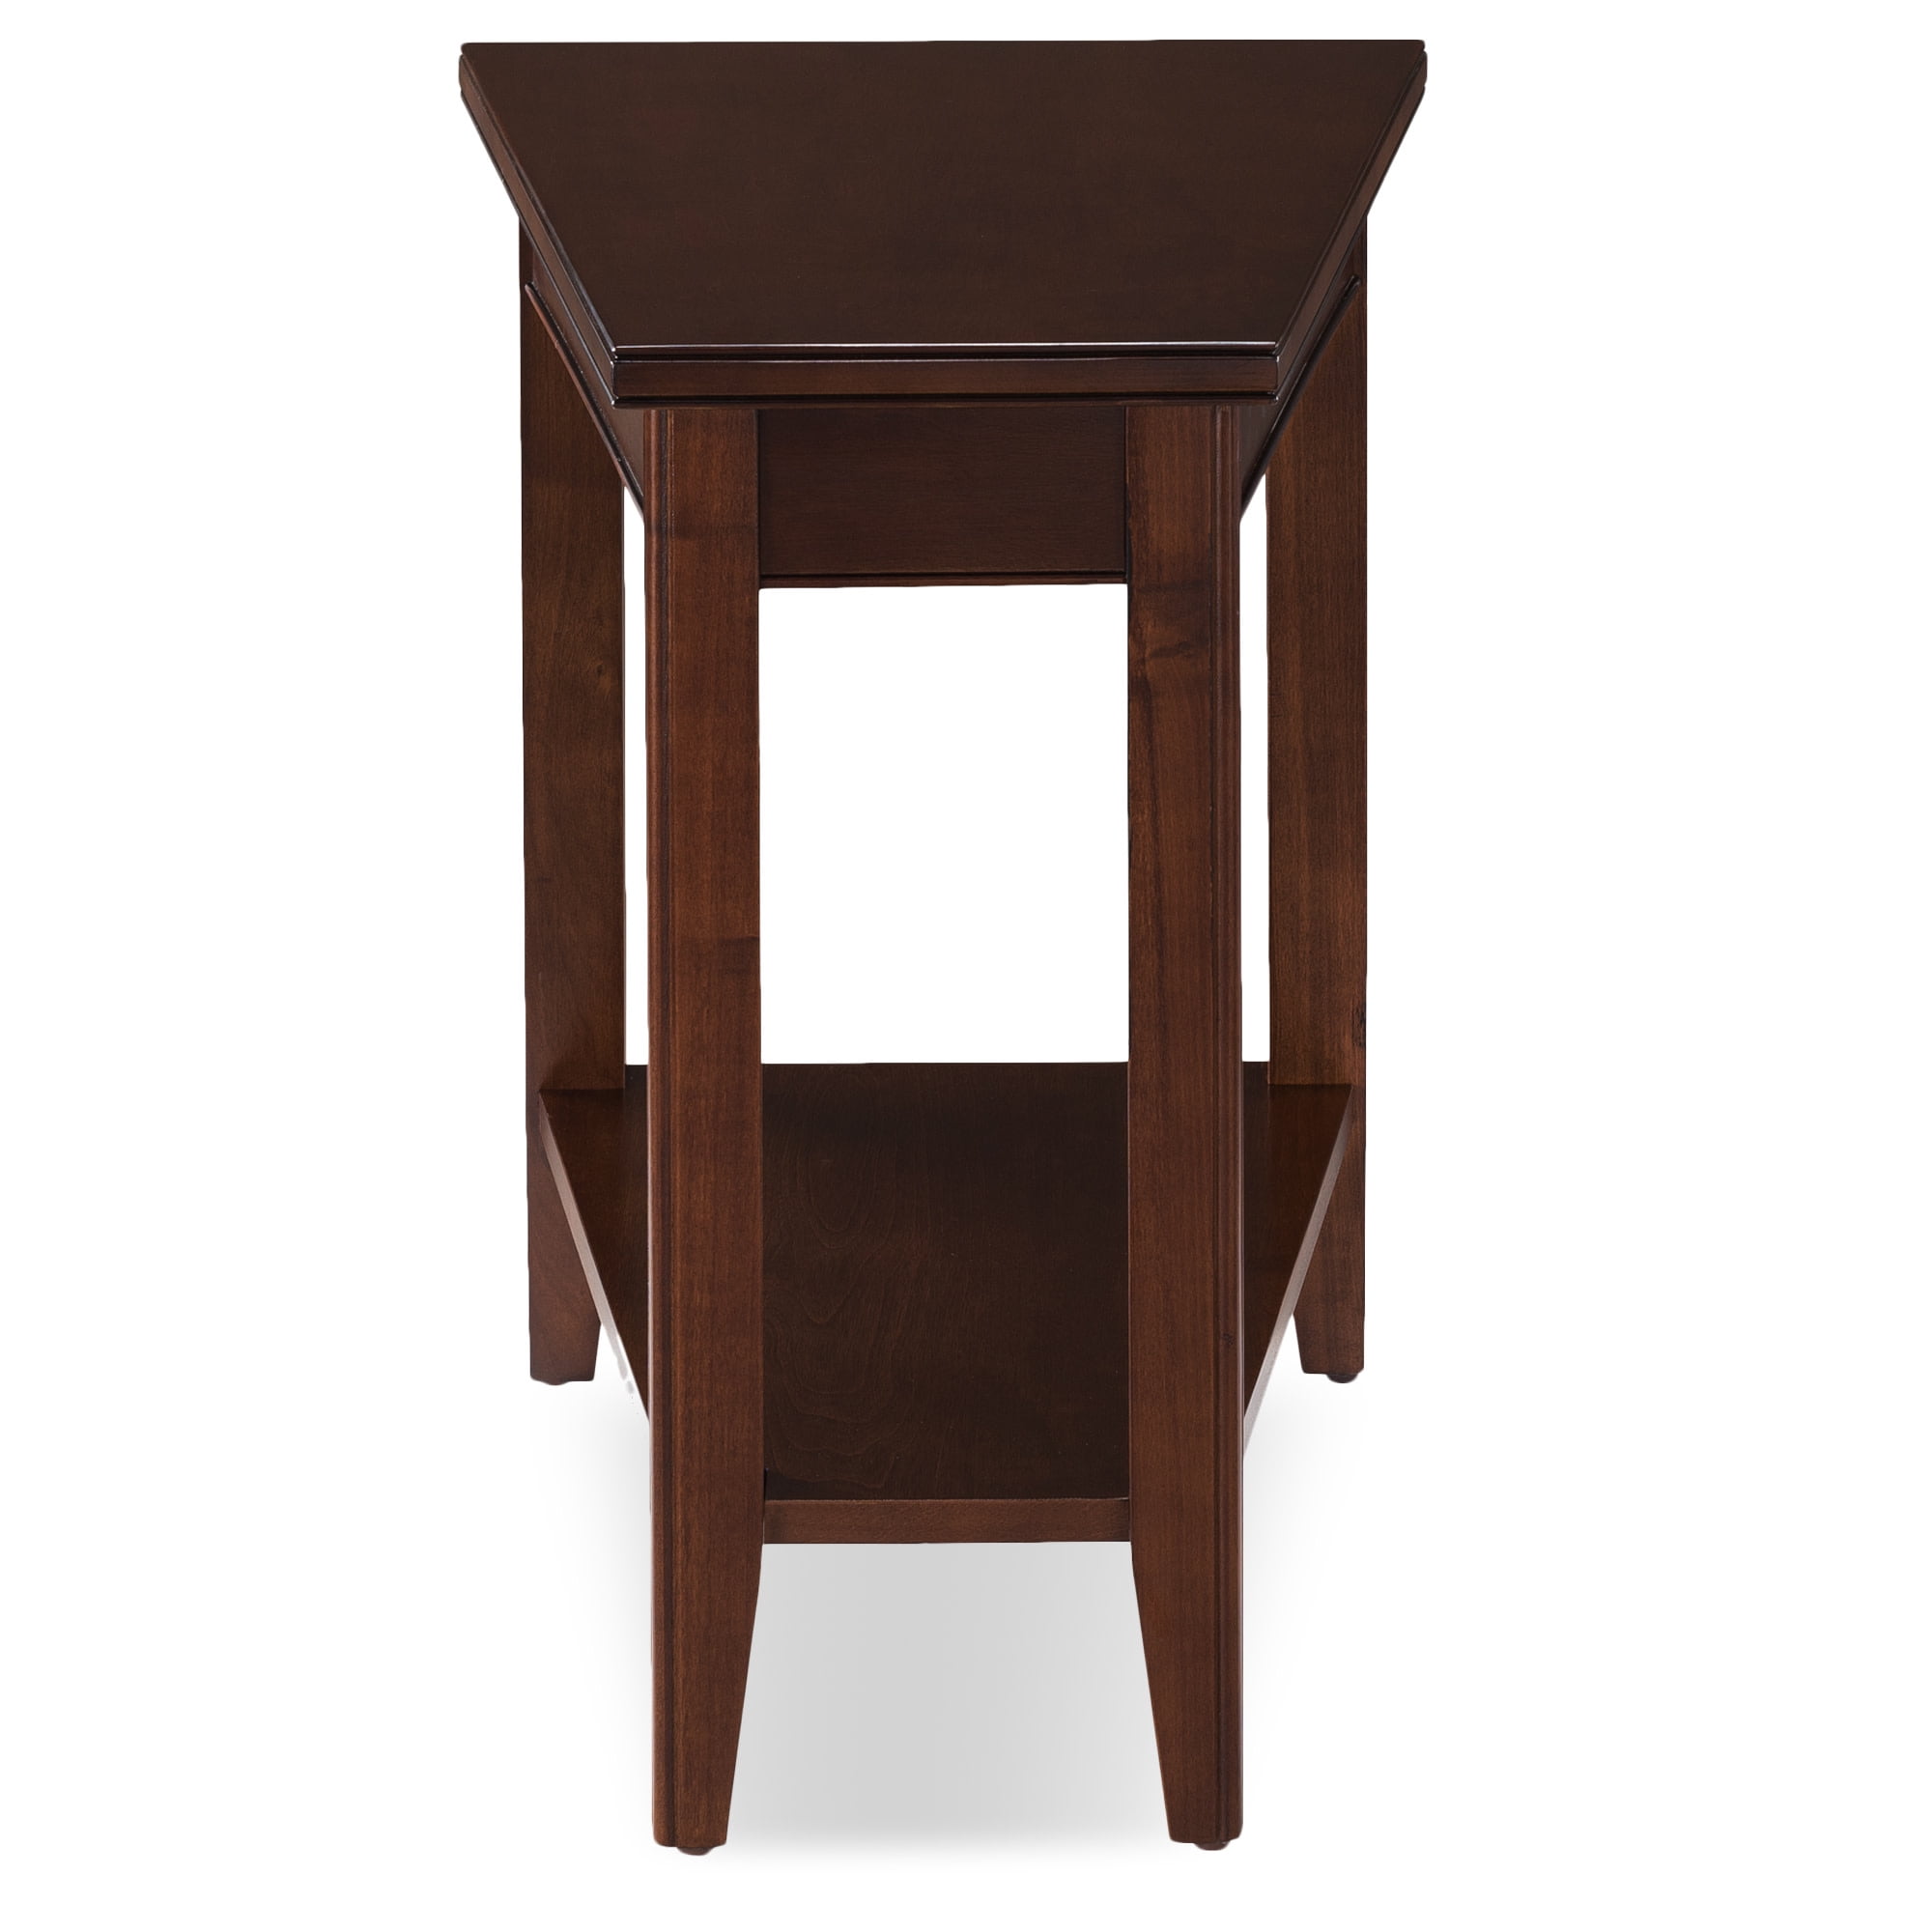 Design House Leick Home Laurent Recliner Wedge Table in Chocolate Cherry -  Walmart.com